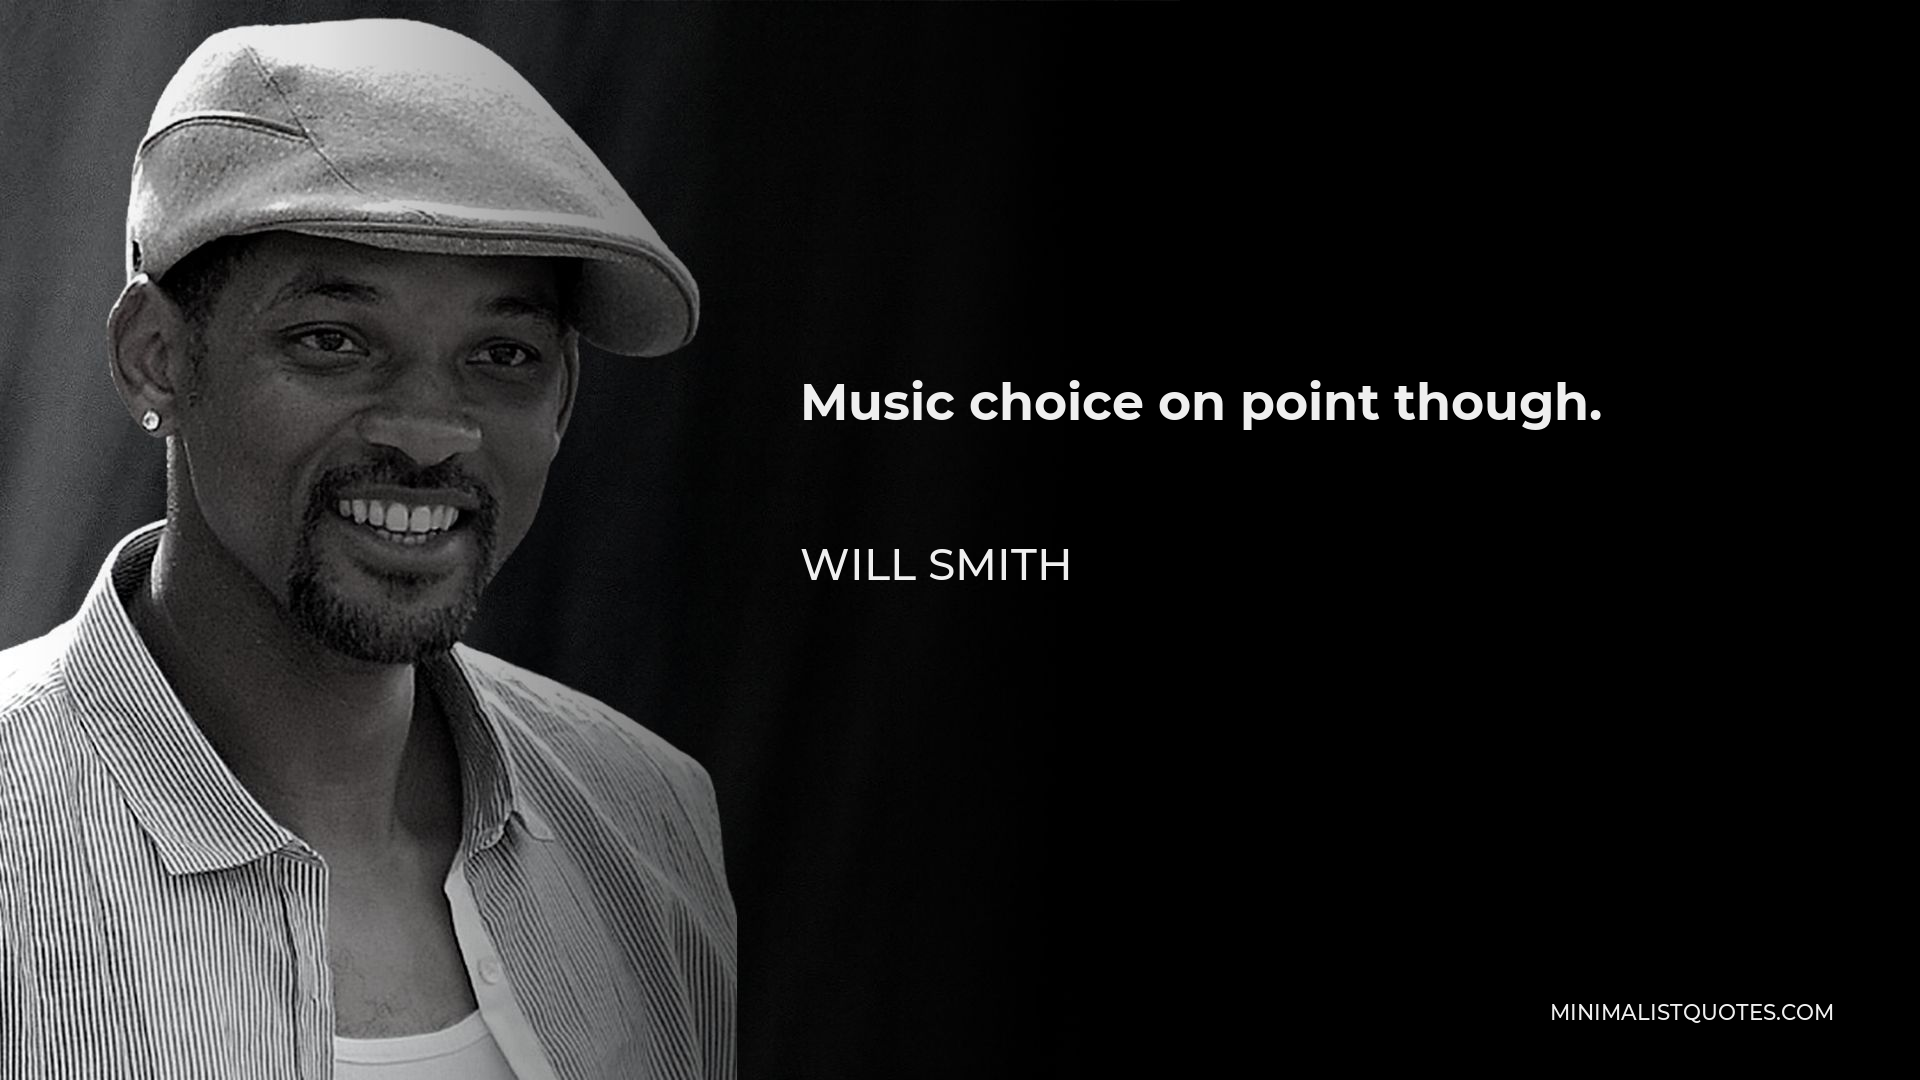 Will Smith Quote - Music choice on point though.